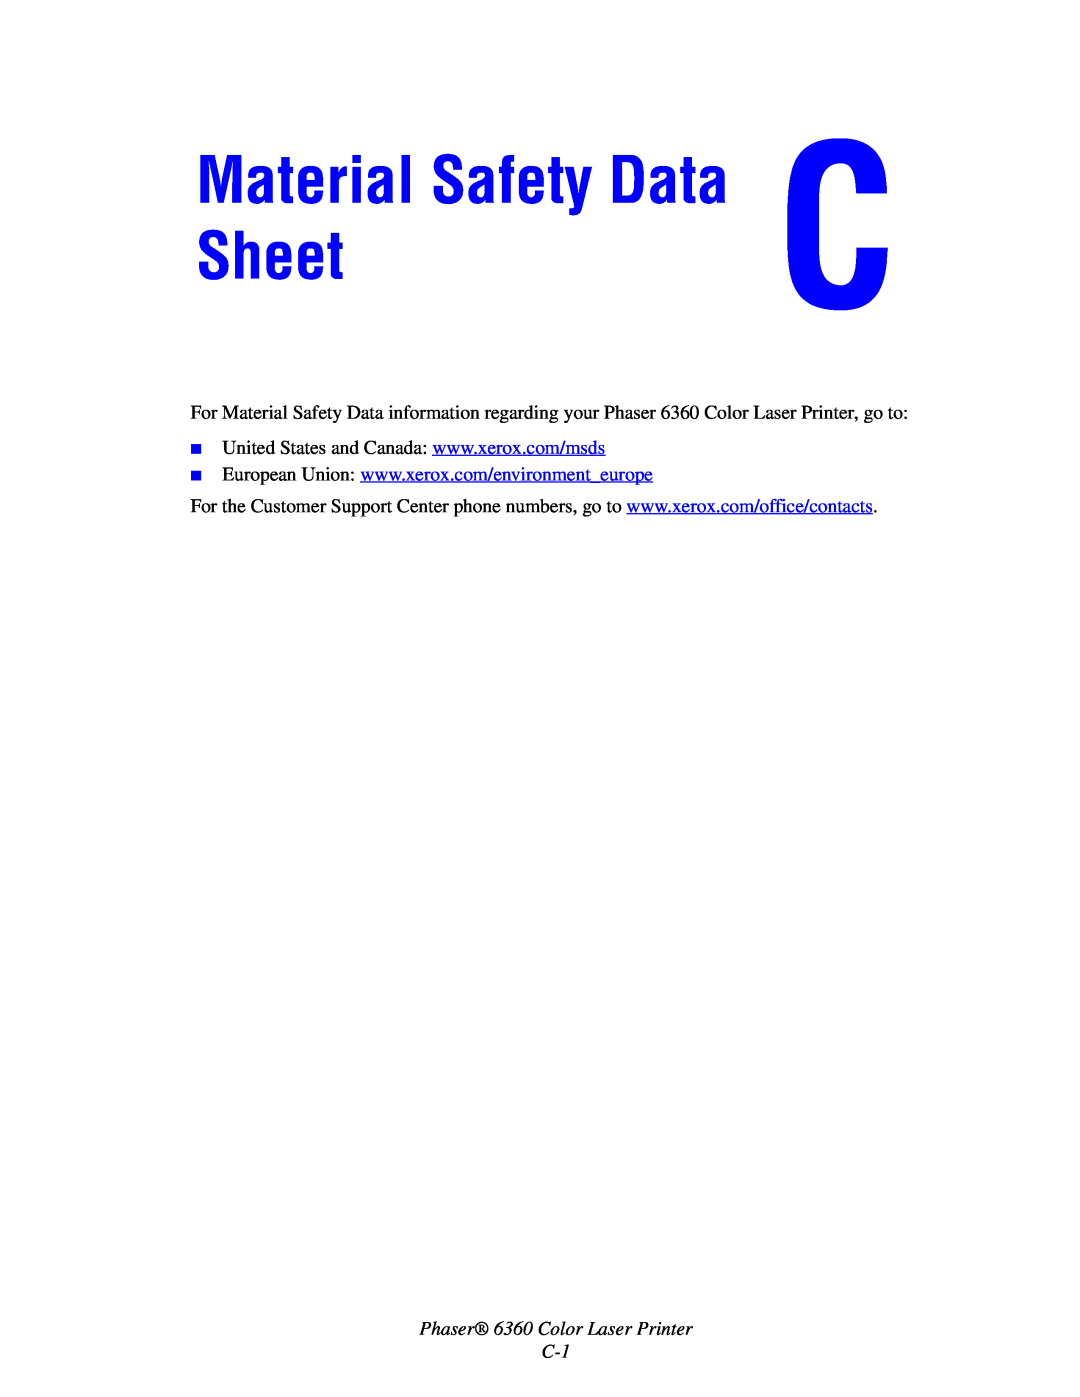 Xerox manual Material Safety Data Sheet, Phaser 6360 Color Laser Printer C-1 